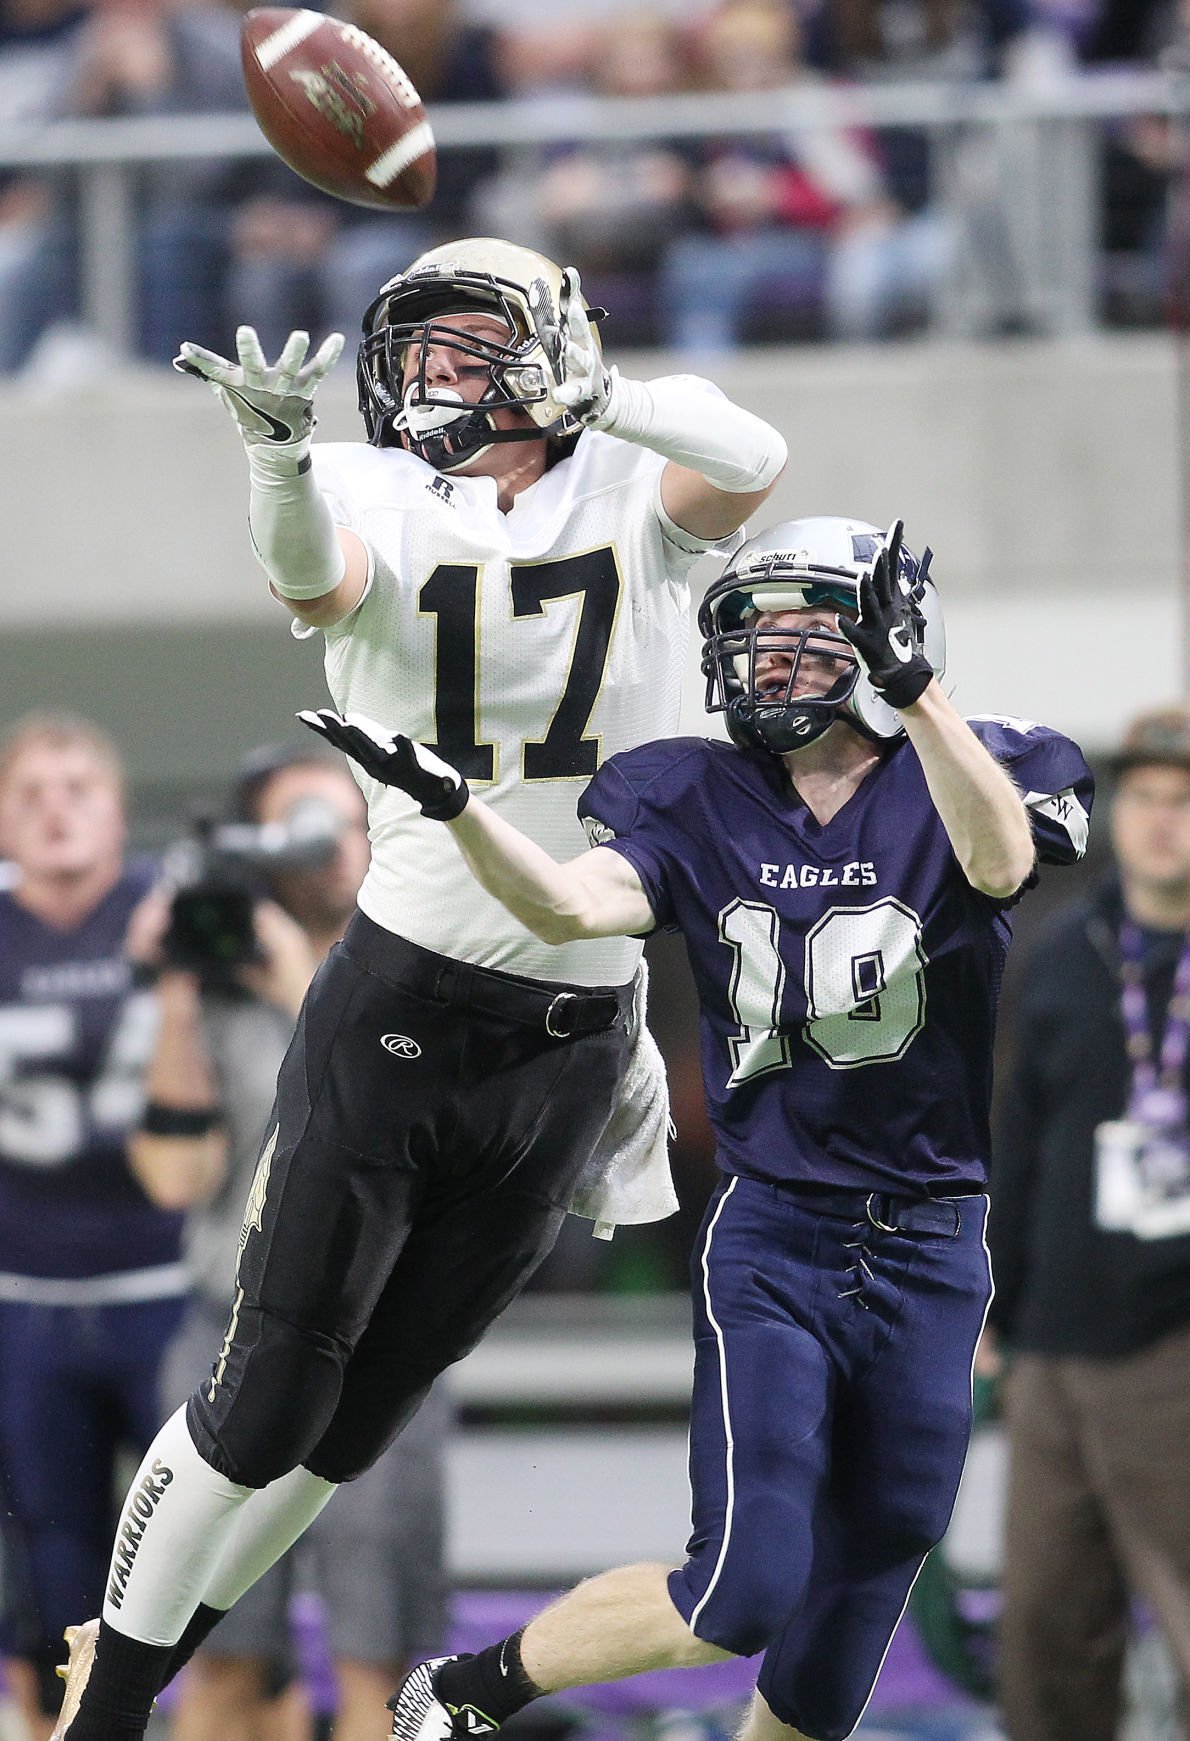 MSHSL football playoffs Caledonia heads to state quarterfinals after